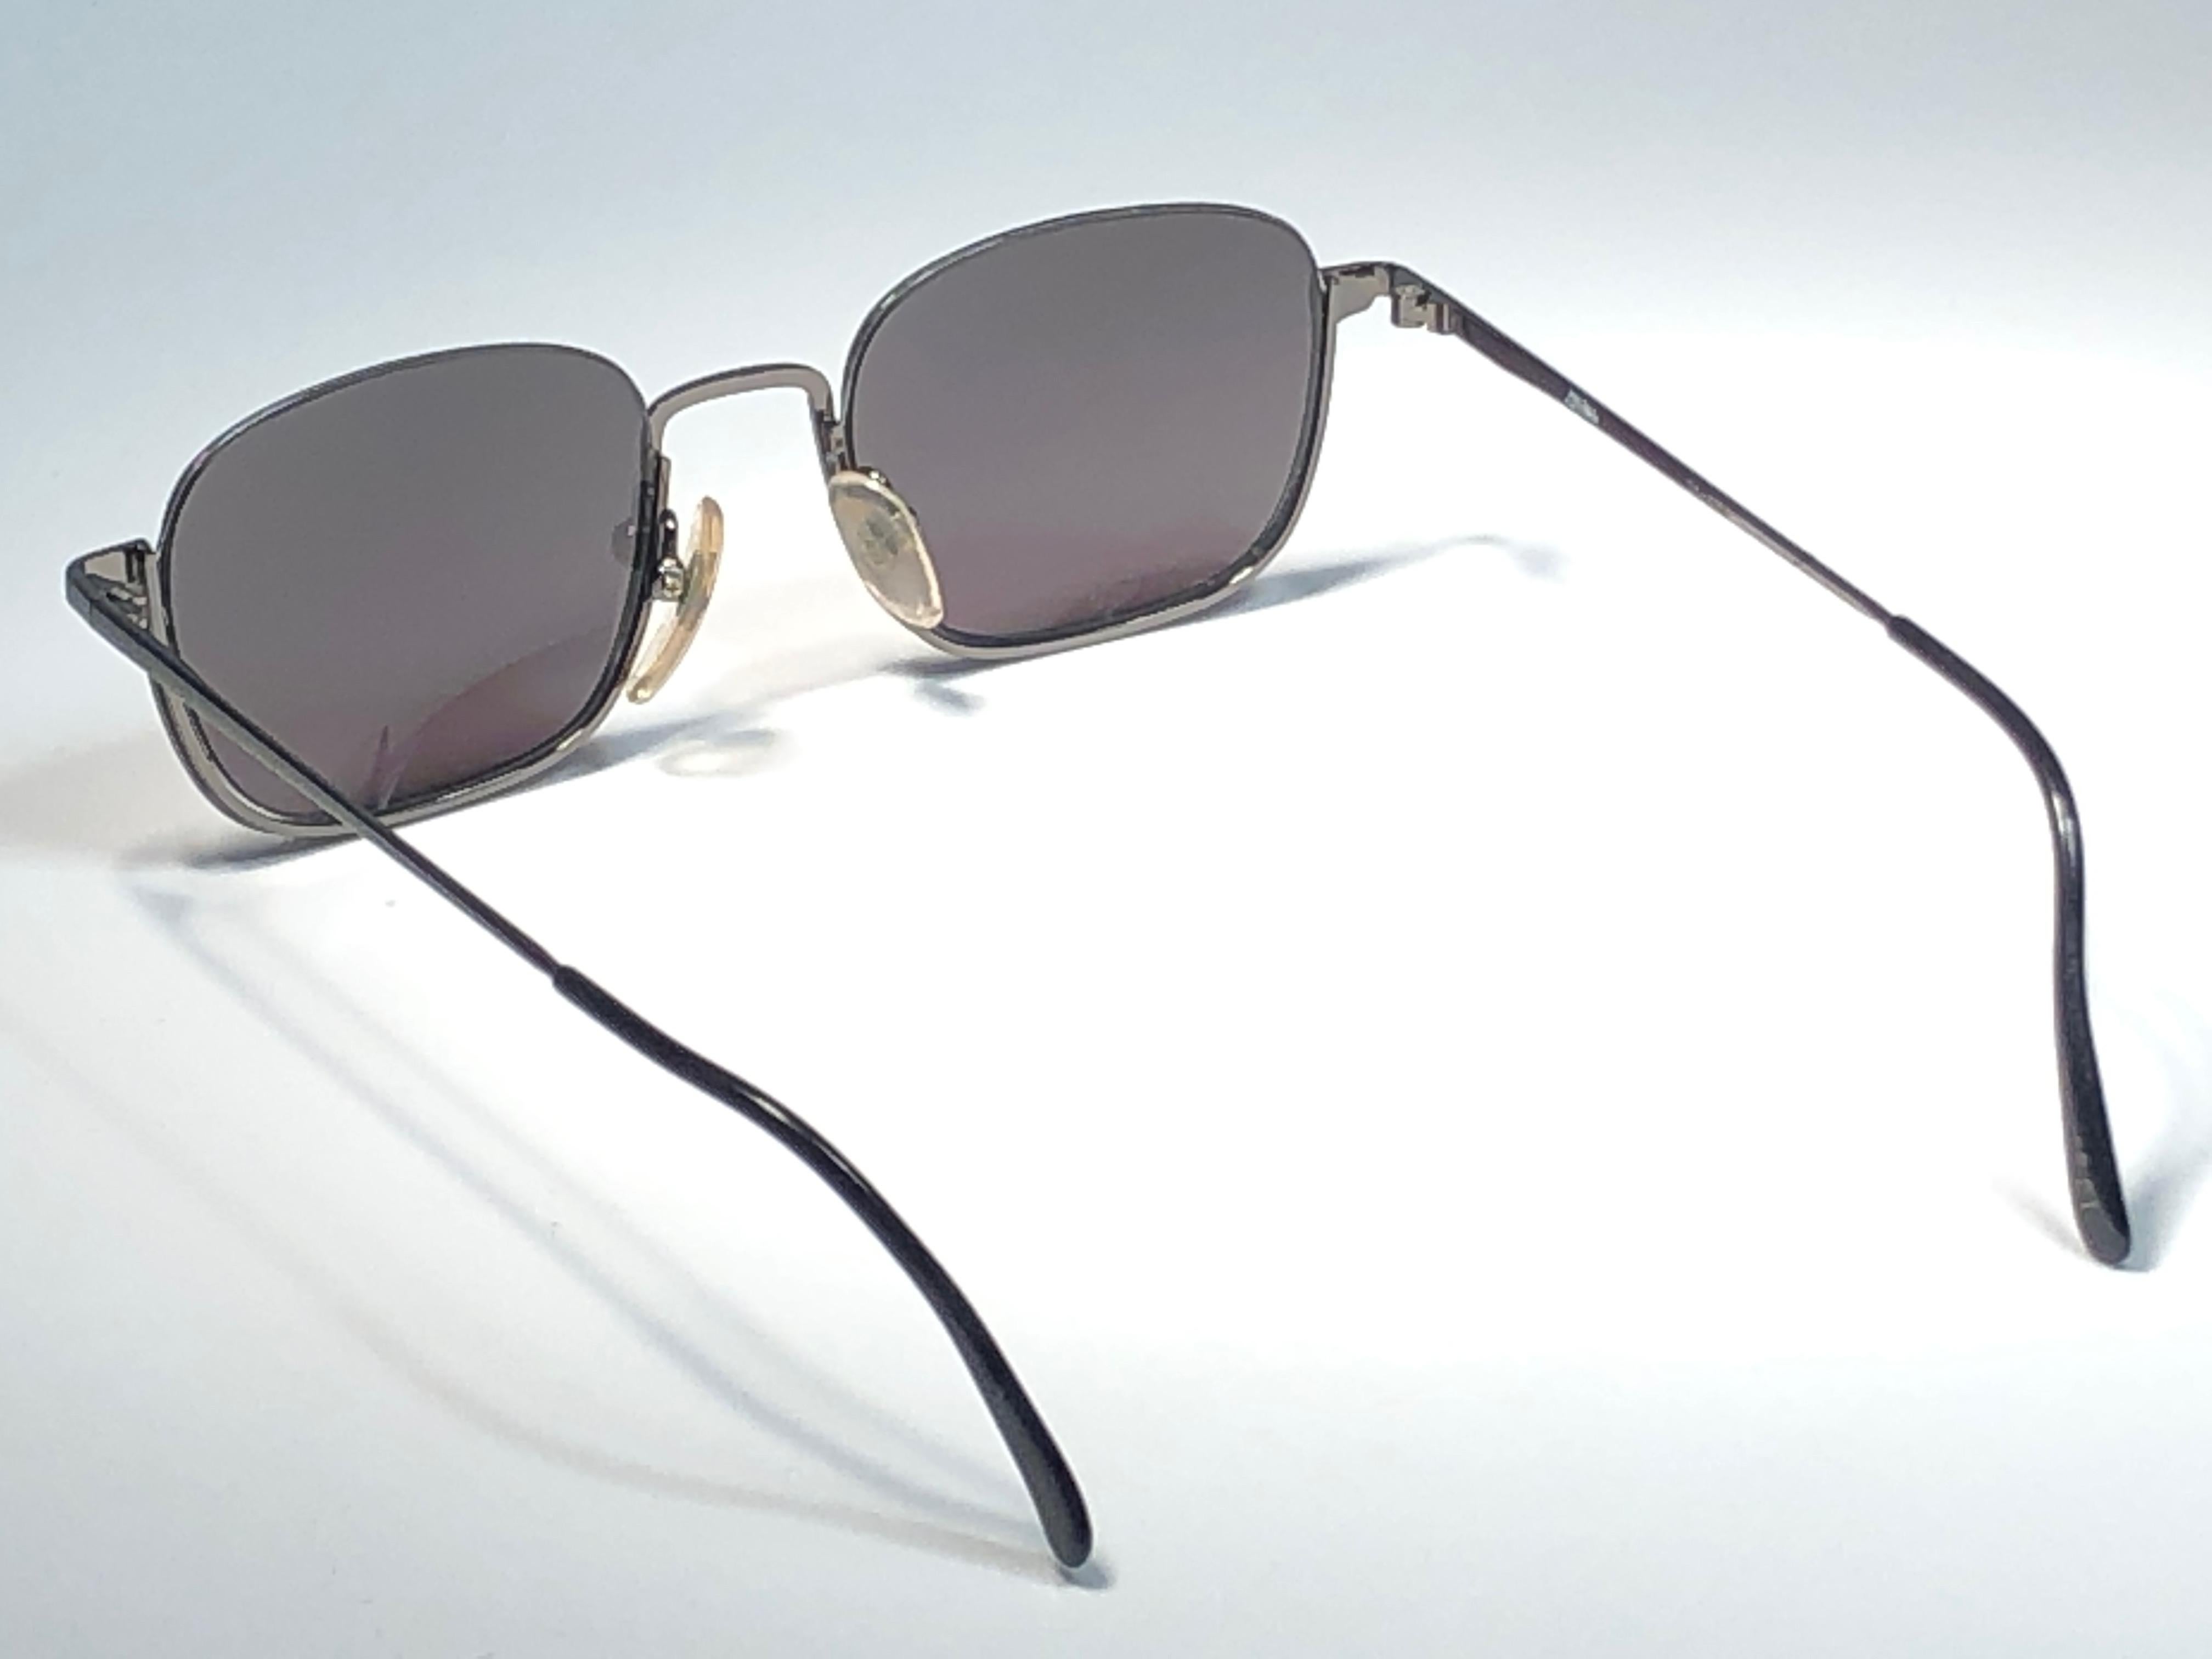 New Jean Paul Gaultier medium half frame grey sunglasses.
Spotless smoke grey lenses that complete a ready to wear JPG look.

Amazing design with strong yet intricate details.
Design and produced in the 1990's.
New, never worn or displayed.
This